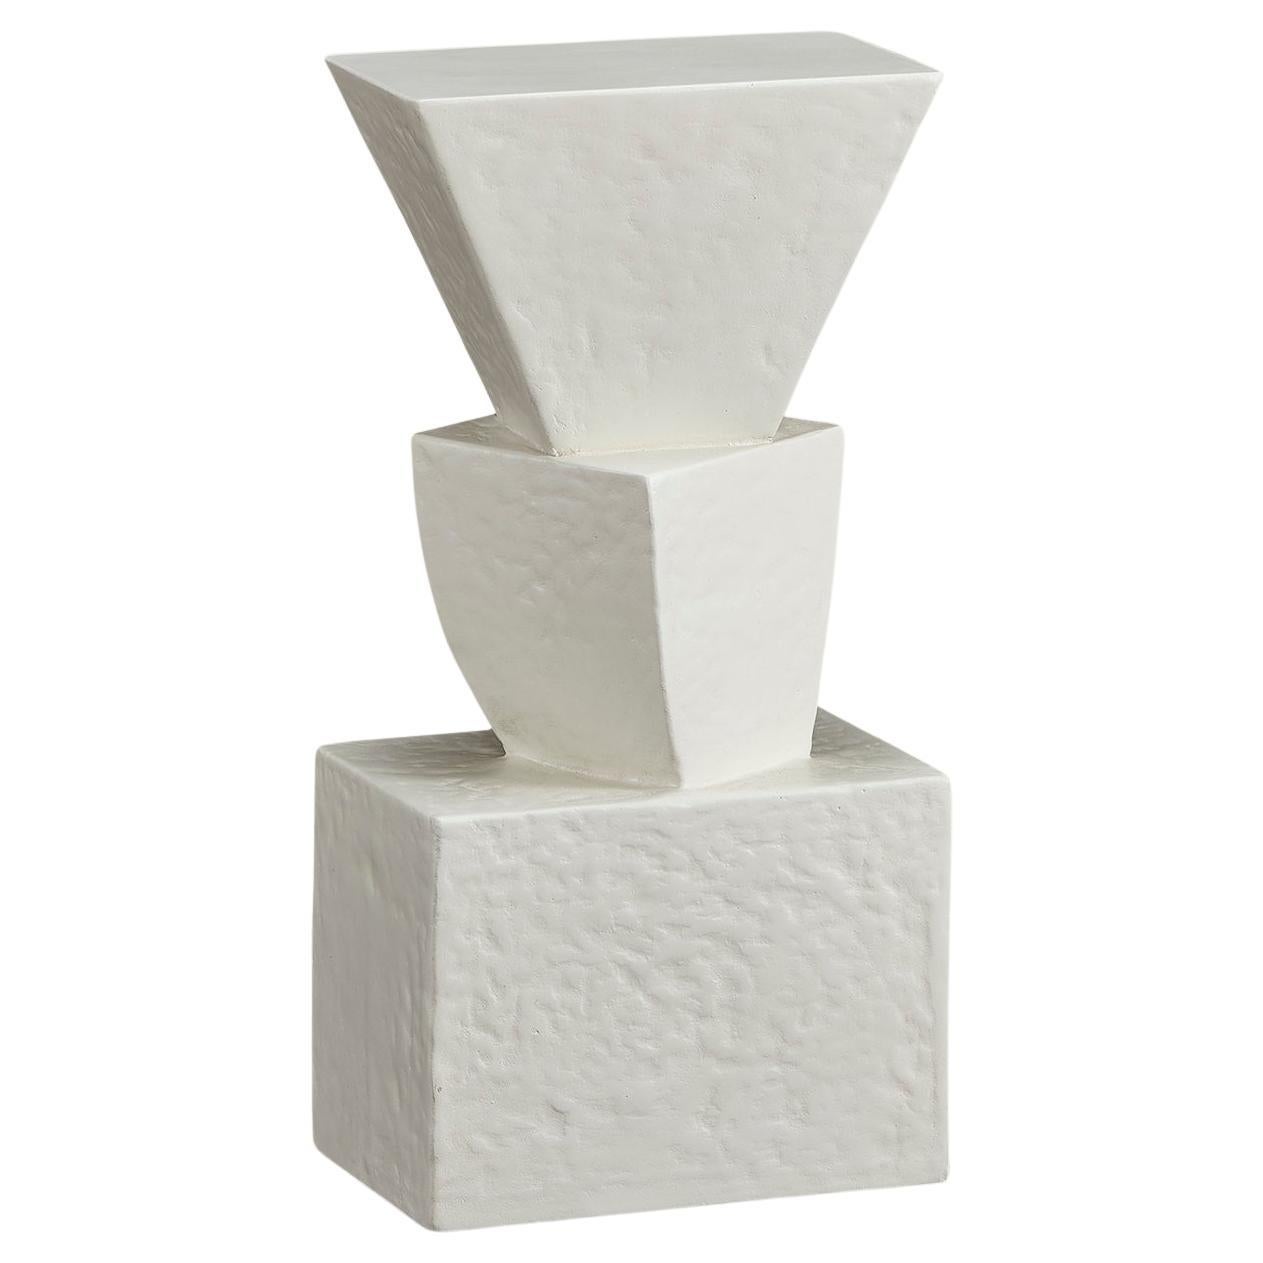 "Diego" Architectural Plaster Side Table by Christiane Lemieux For Sale